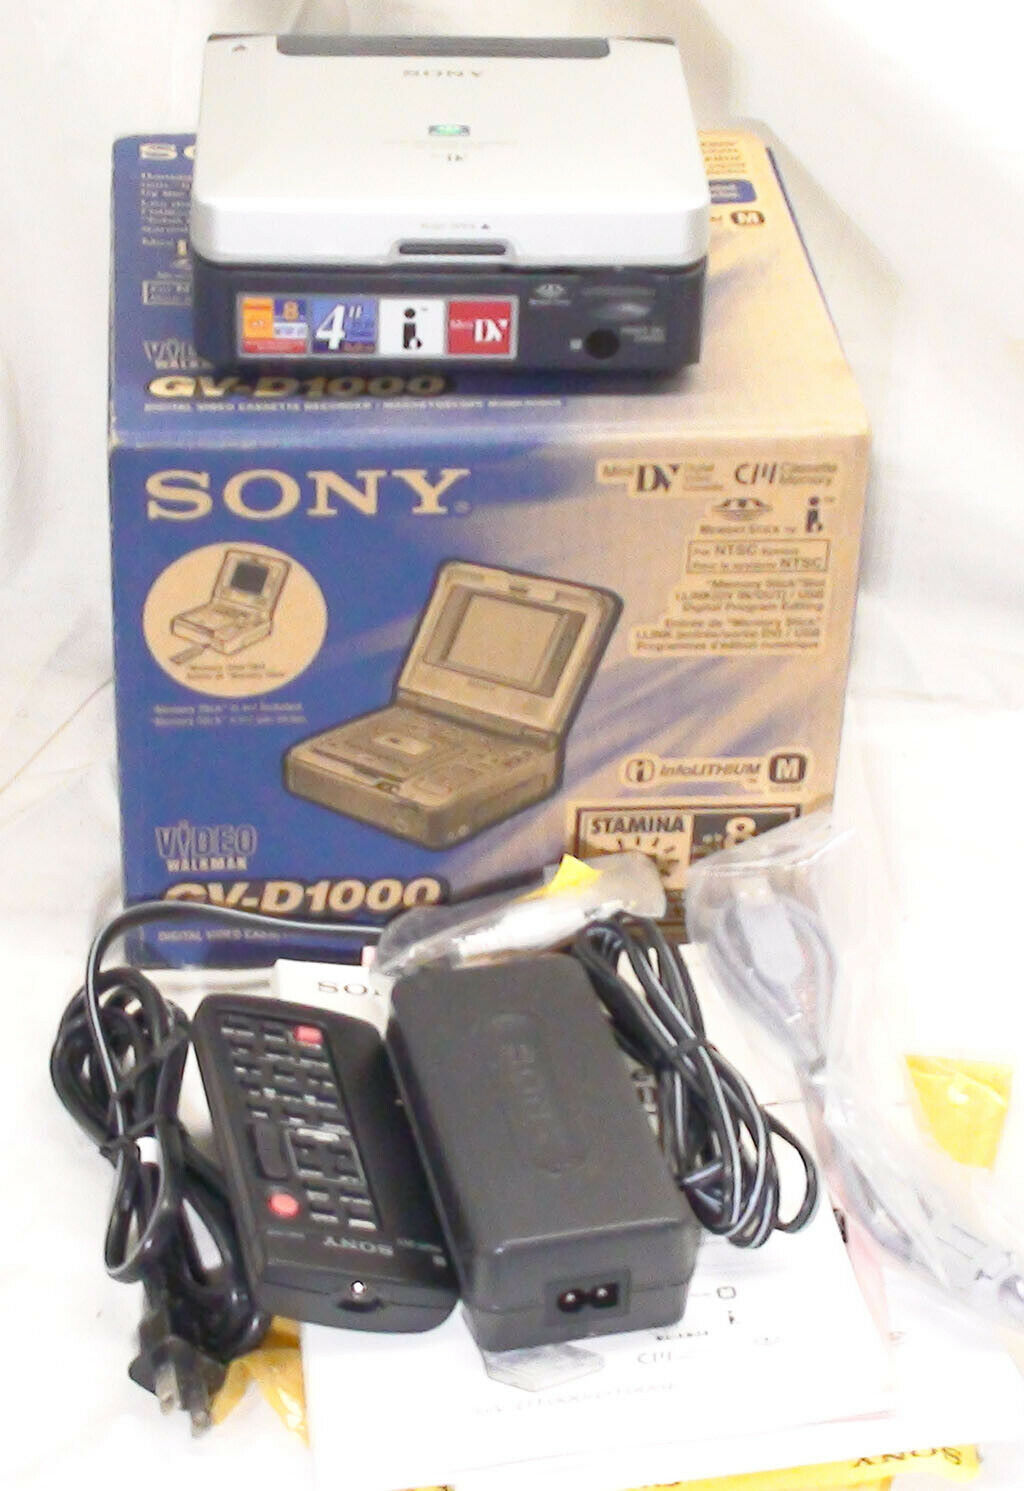 sony GV-D1000e Pal system miniDV video cassette recorder player with 4